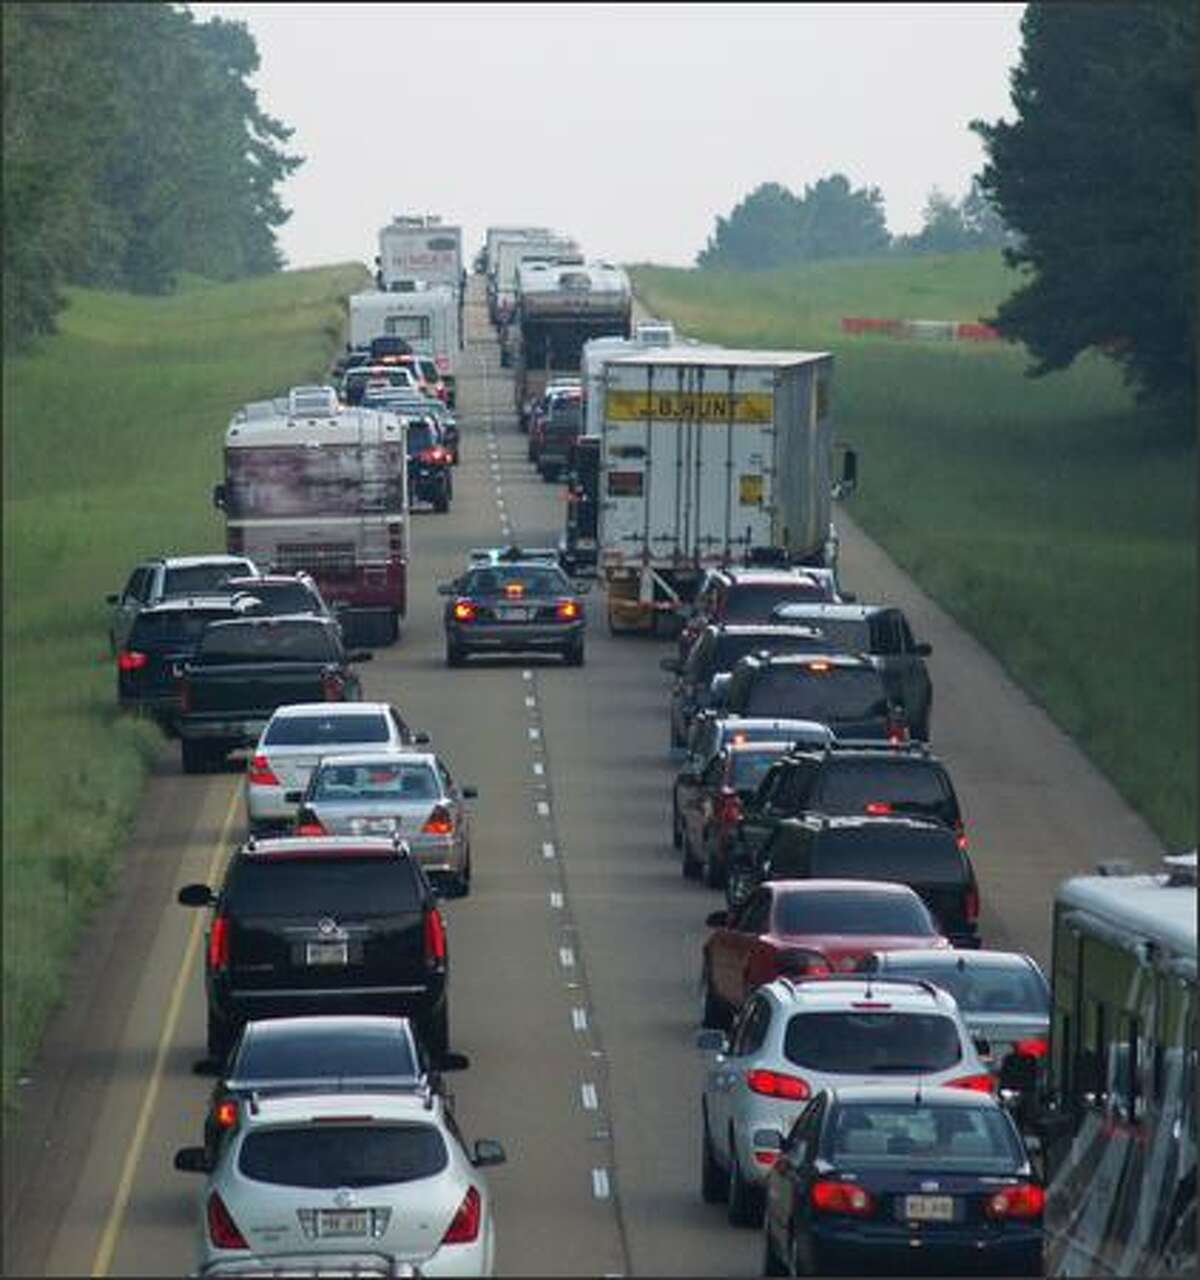 A Mississippi Highway Patrol vehicle attempts to make its way through northbound traffic on U.S. 55 Sunday as evacuees line the interstate on their way out of the path of Hurricane Gustav on Sunday. Both the north and southbound lanes of U.S. 55 and U.S. 59 were contraflowed at 4 a.m. Sunday in order to allow for a more speedy evacuation for residents of Louisiana and the Mississippi Gulf Coast areas.